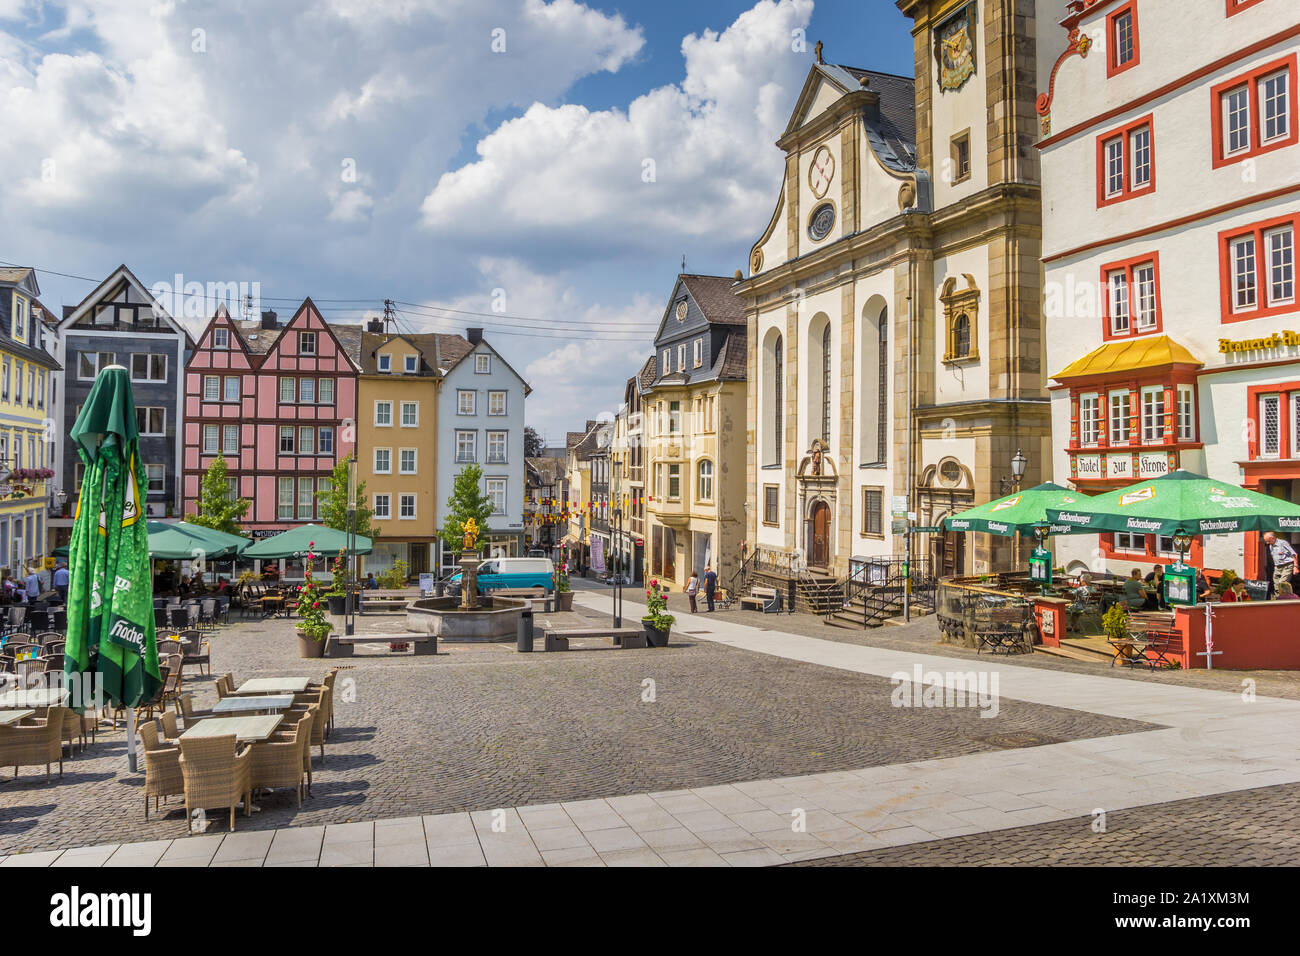 Colorful houses at the central market square of Hachenburg, Germany Stock Photo